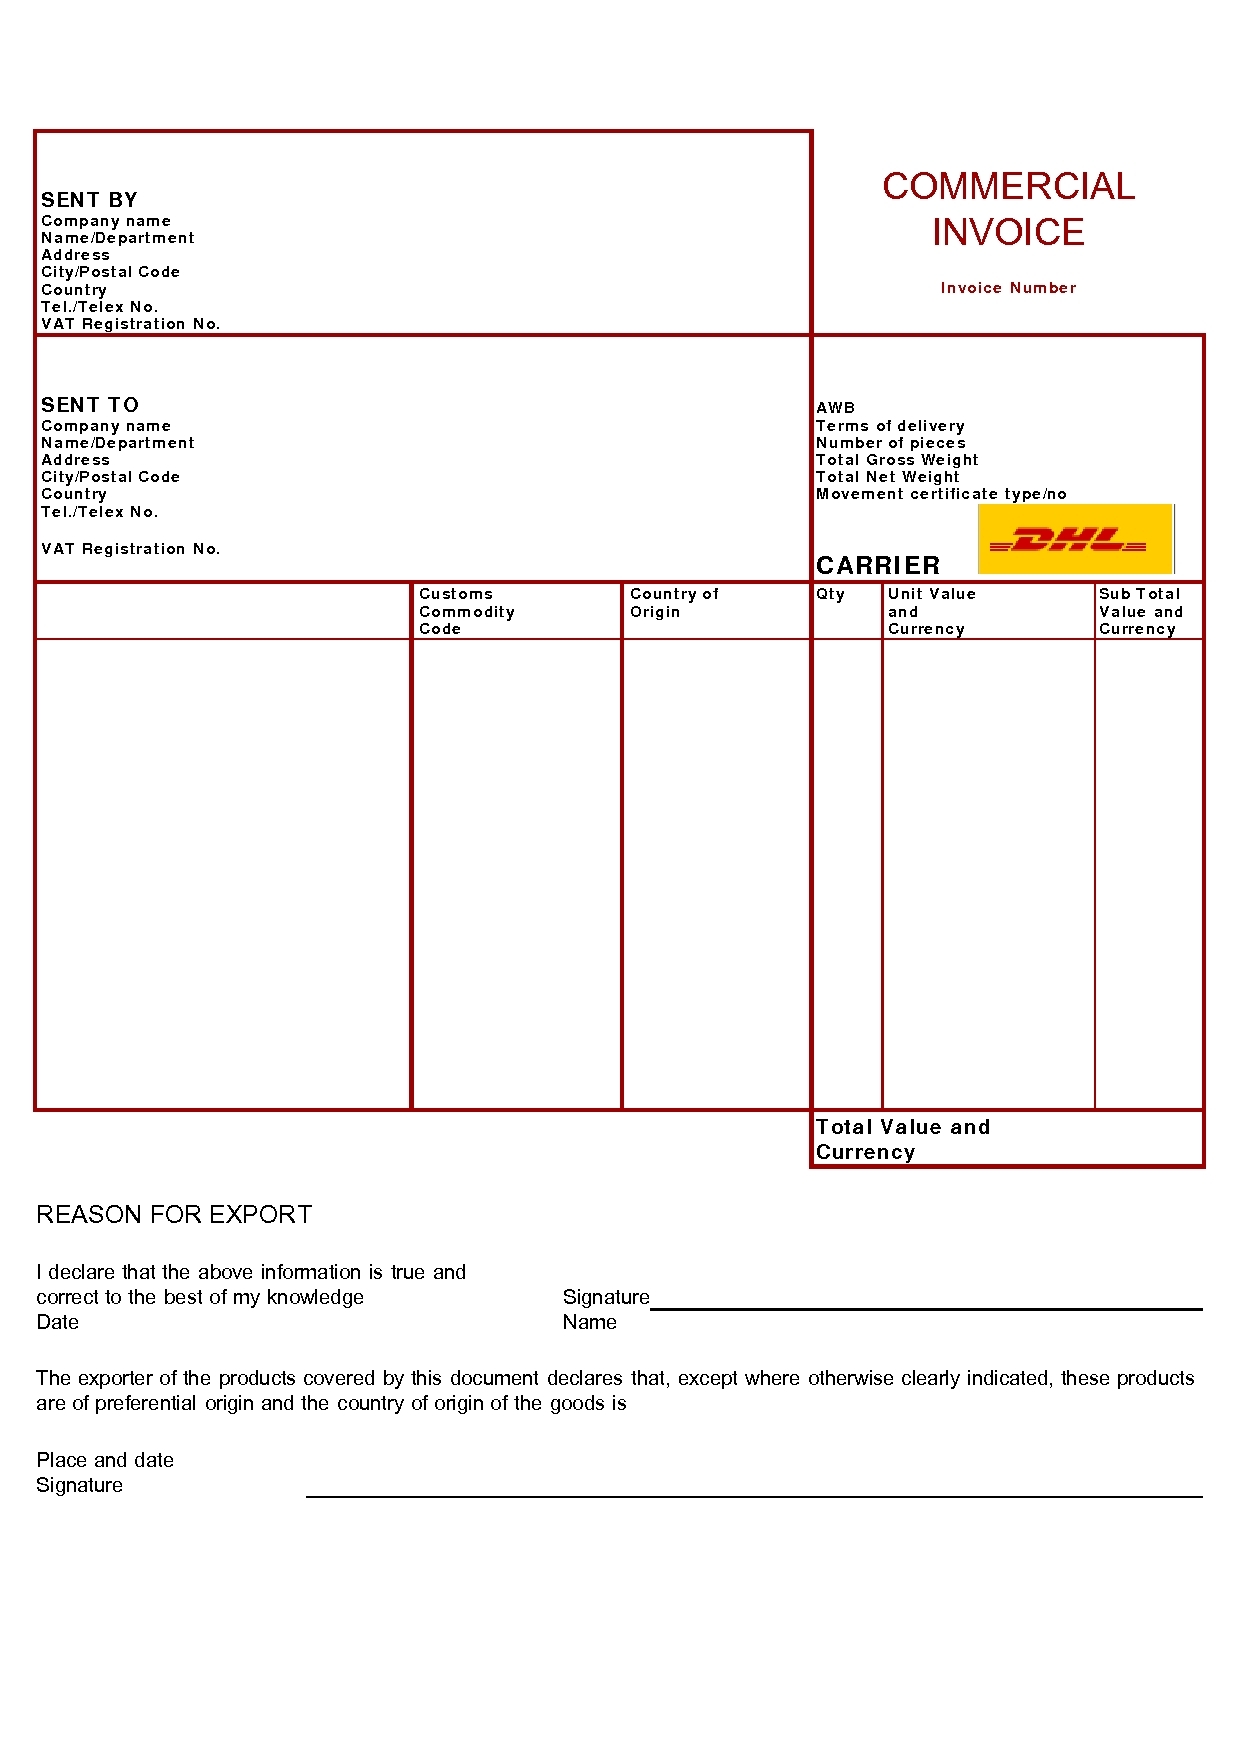 dhl express invoice